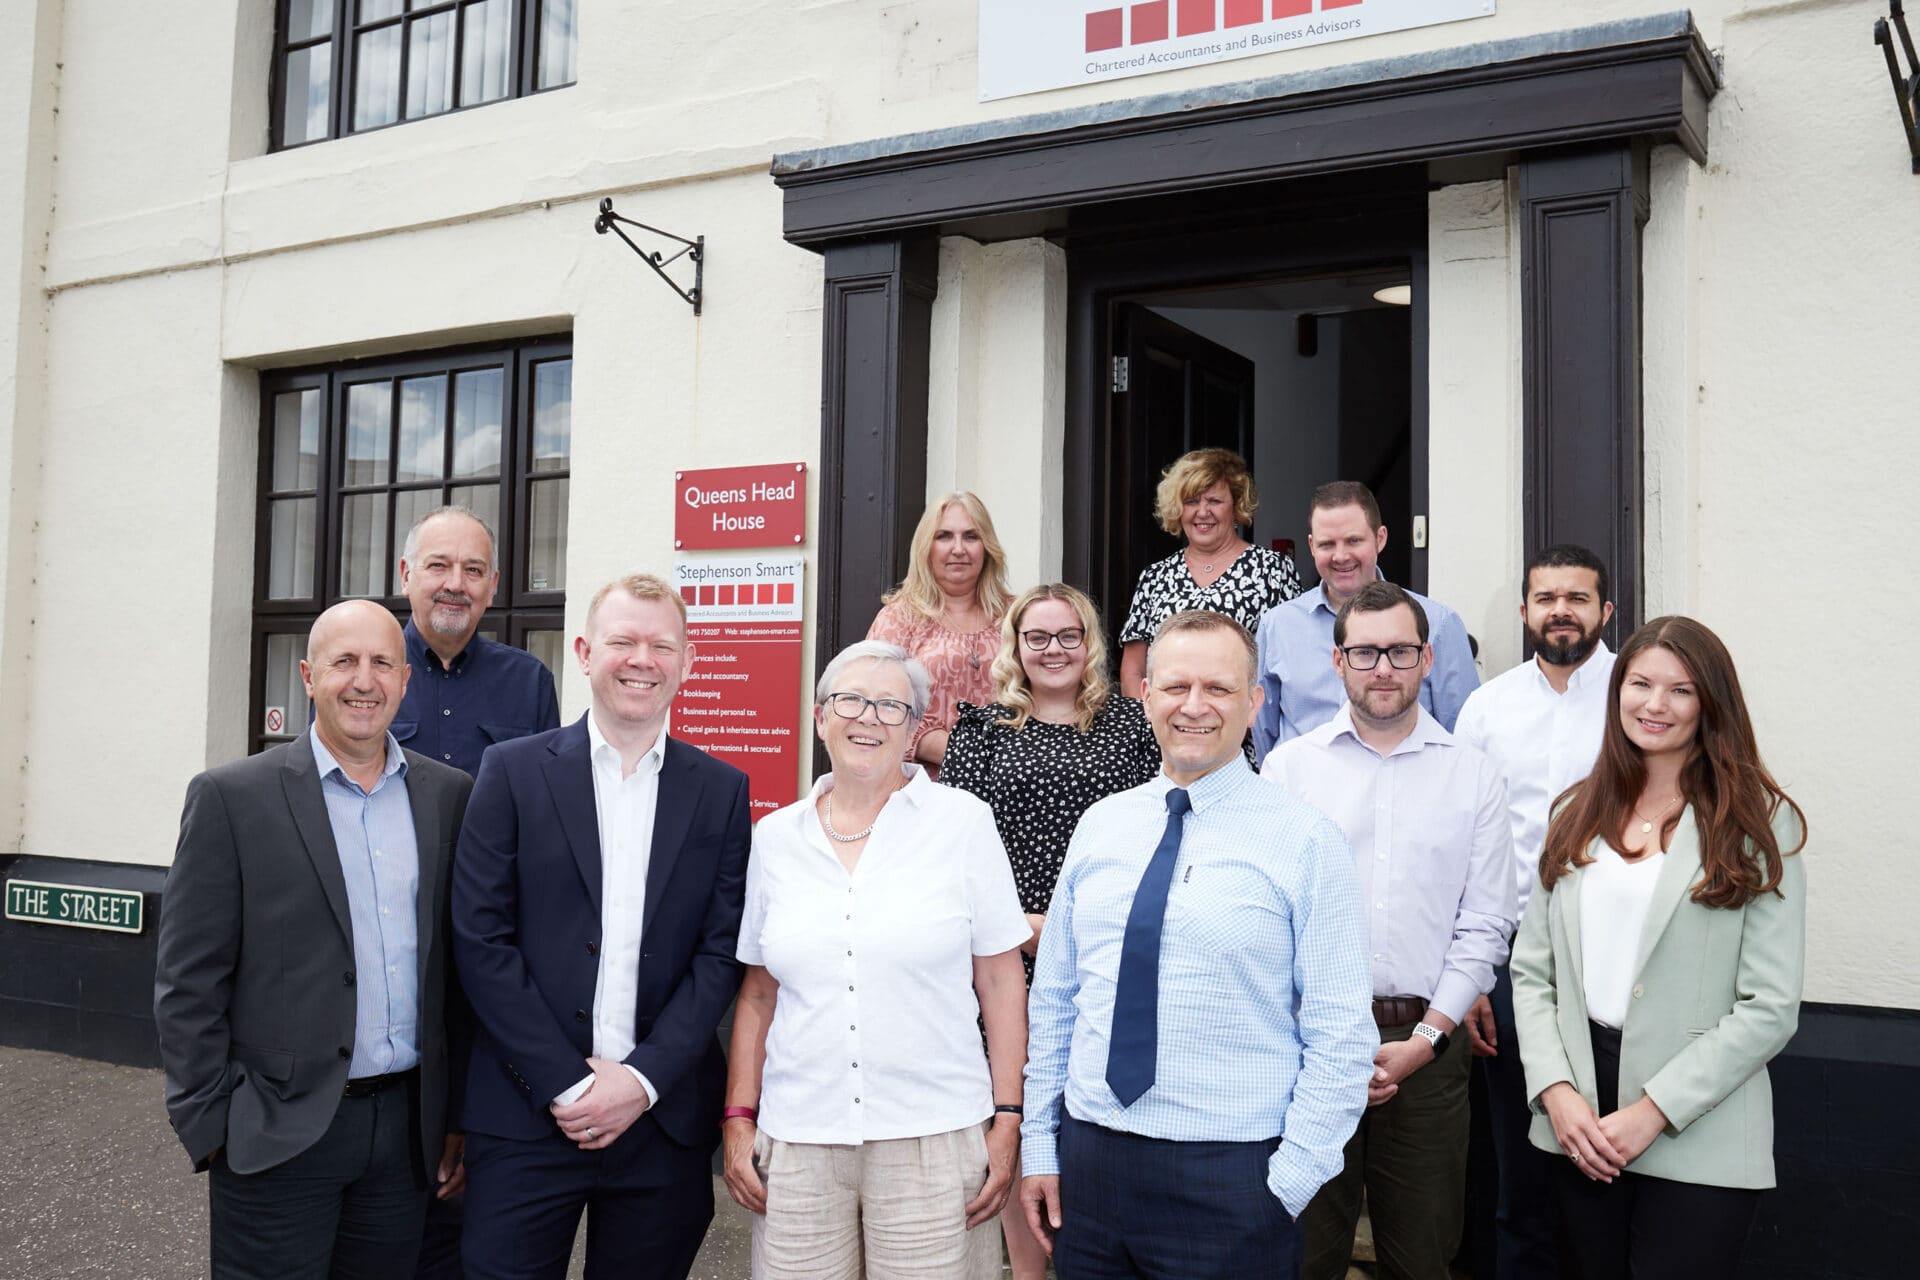 Acle team at Stephenson Smart accountants